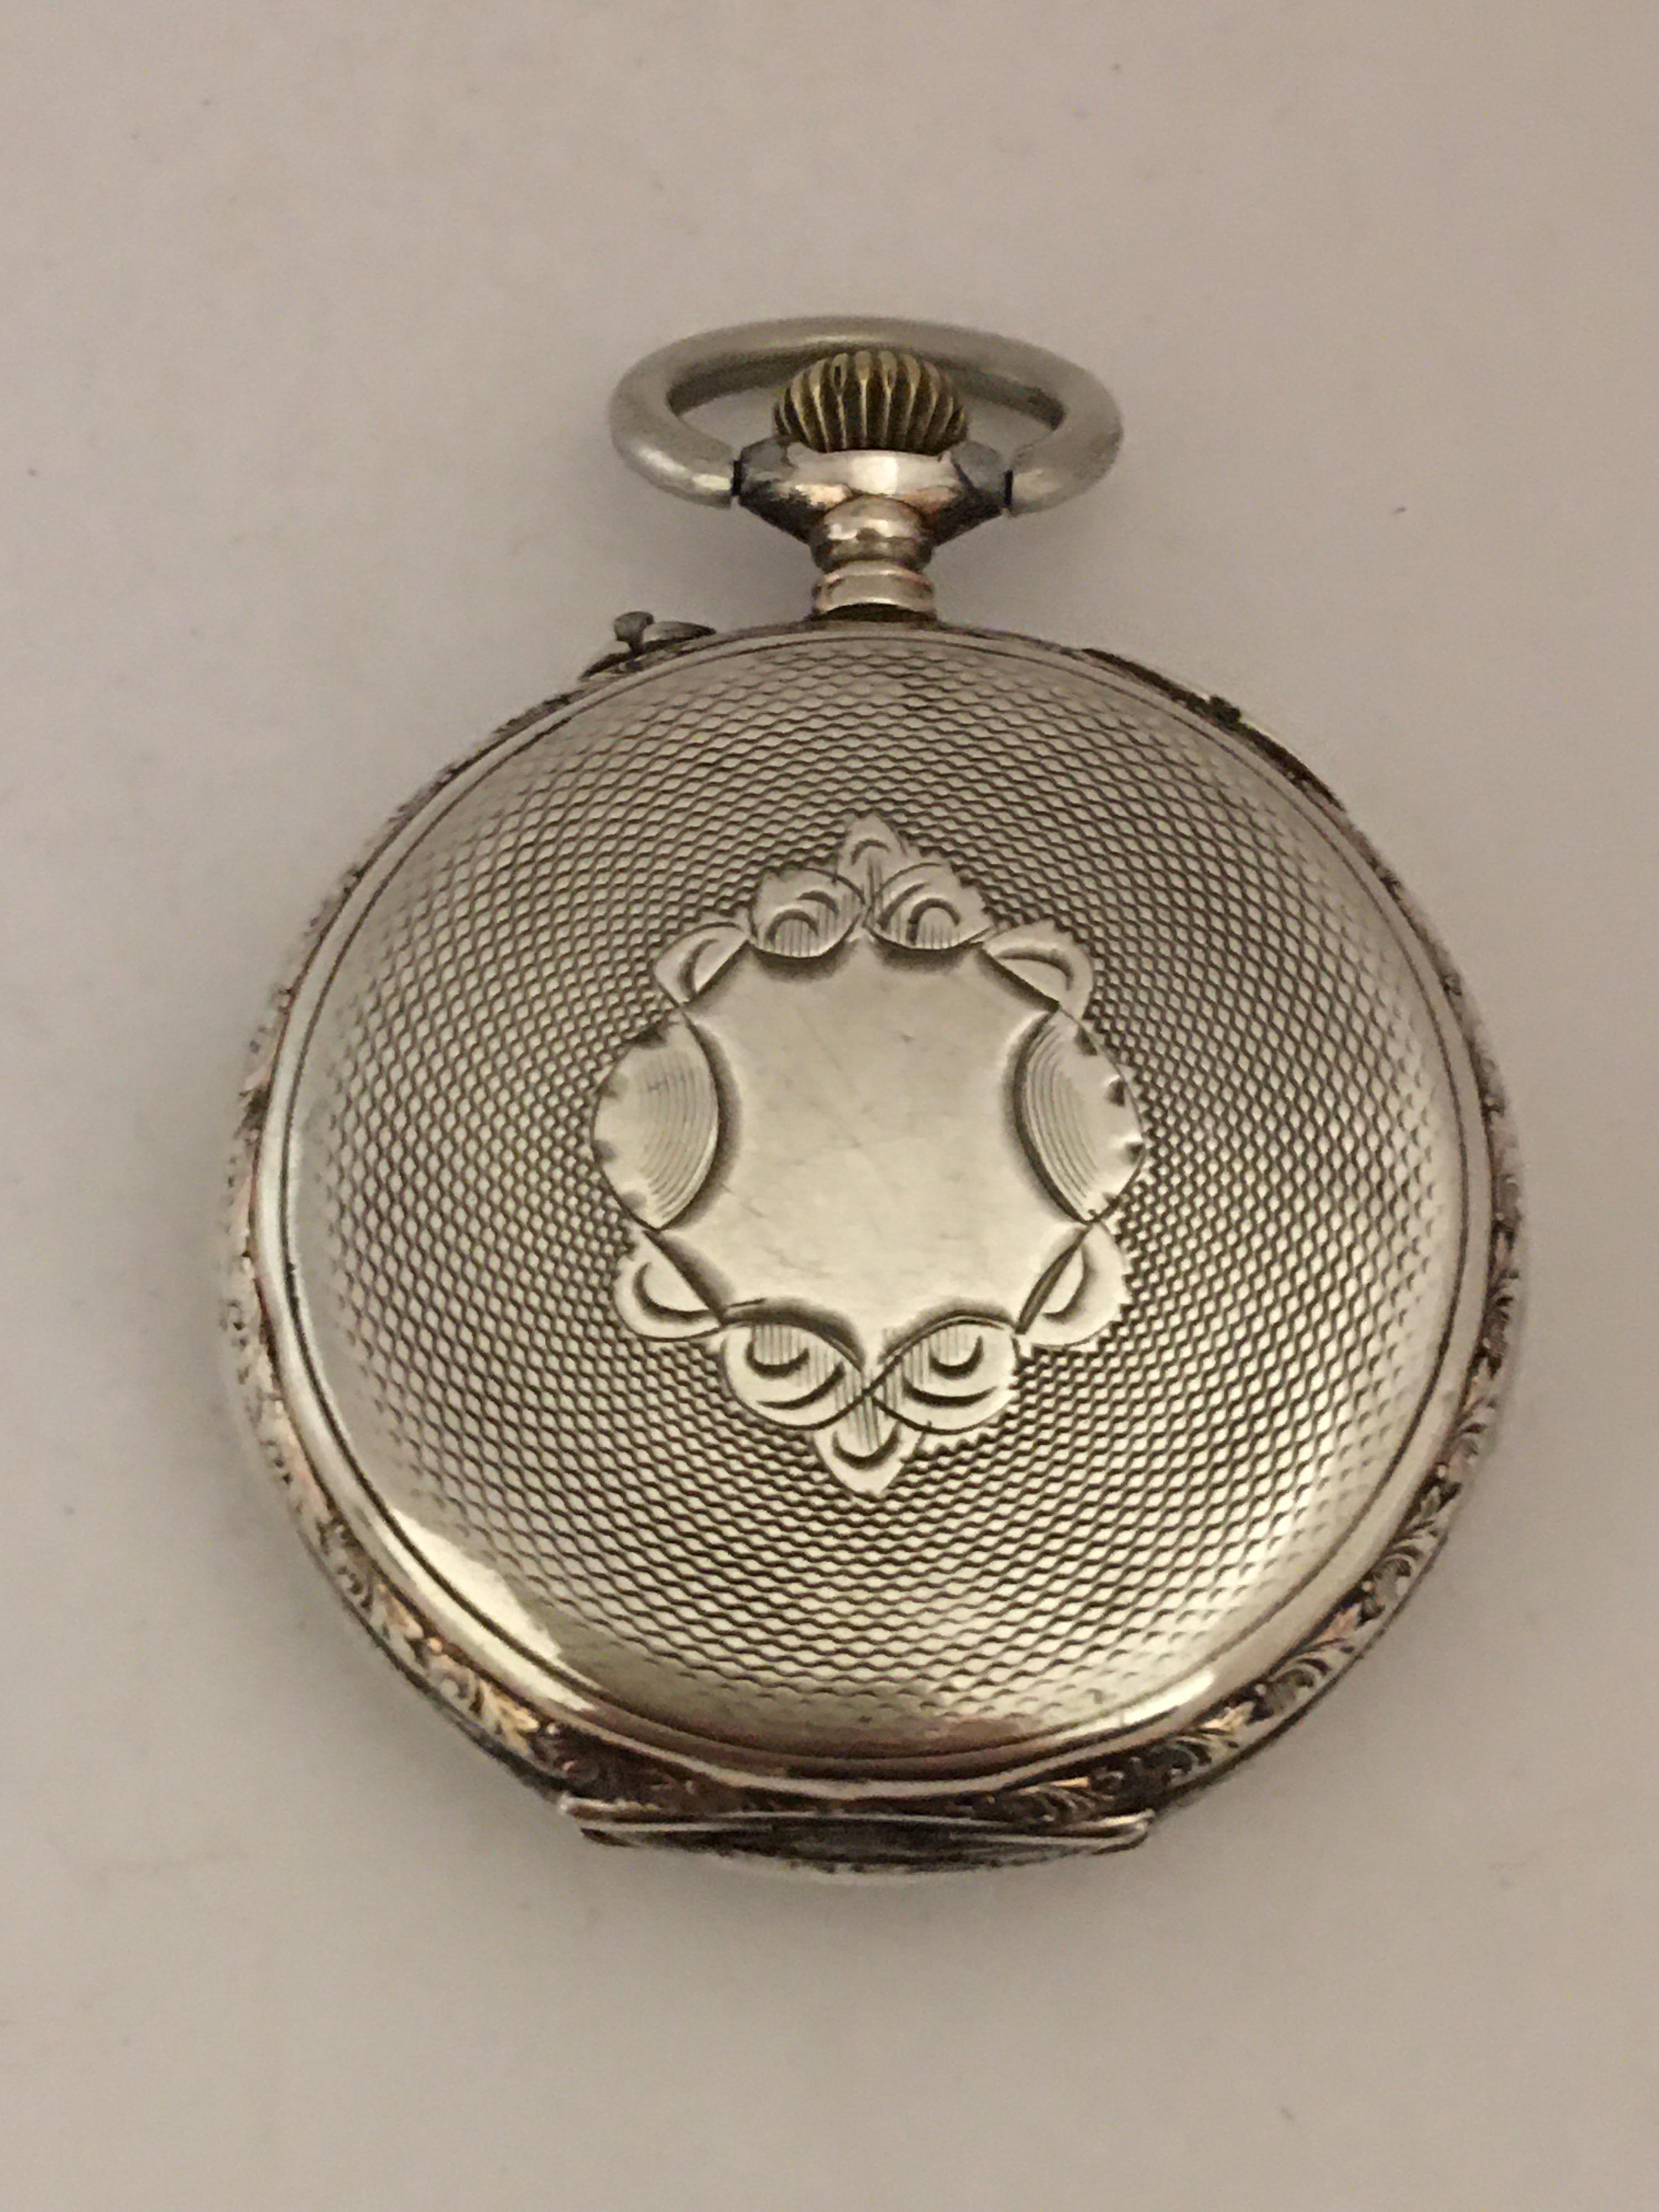 This lovely 42mm Diameter Silver Engine turned case Pocket  Watch is working and it is ticking well. Visible chipped on the edge of the enamel dial below 6 o’clock as shown.

Please study the images carefully as form part of the description.

